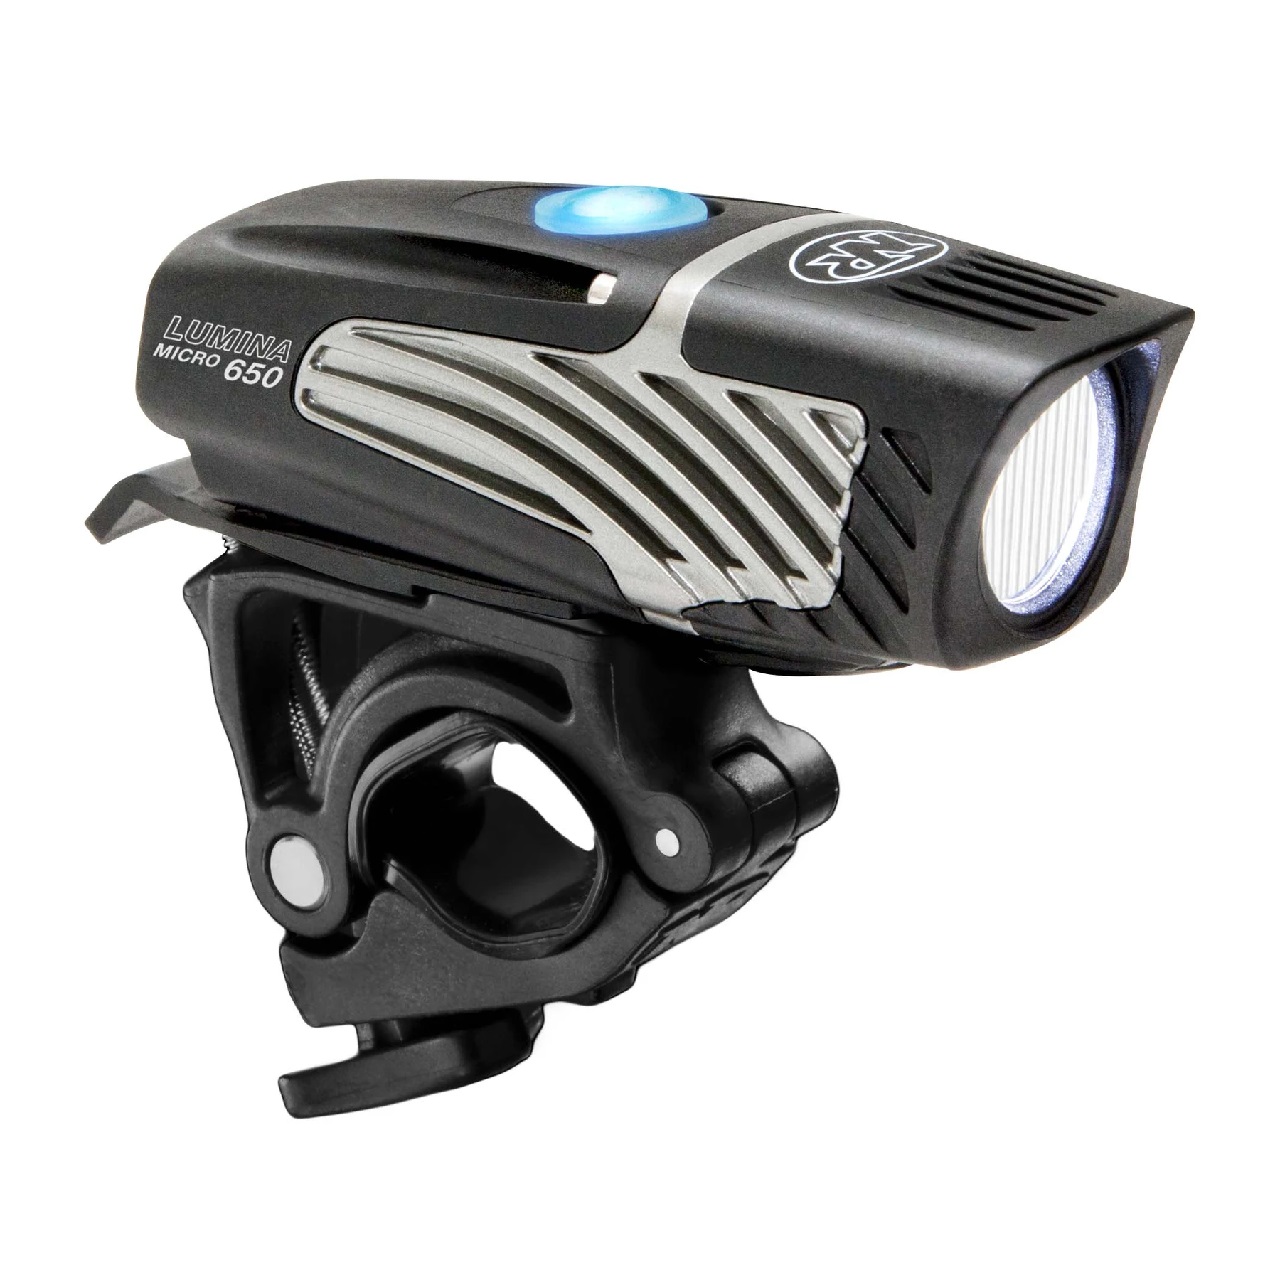 Niterider Micro 650 Road/MTB/Commute Front Cycling Light (6874)